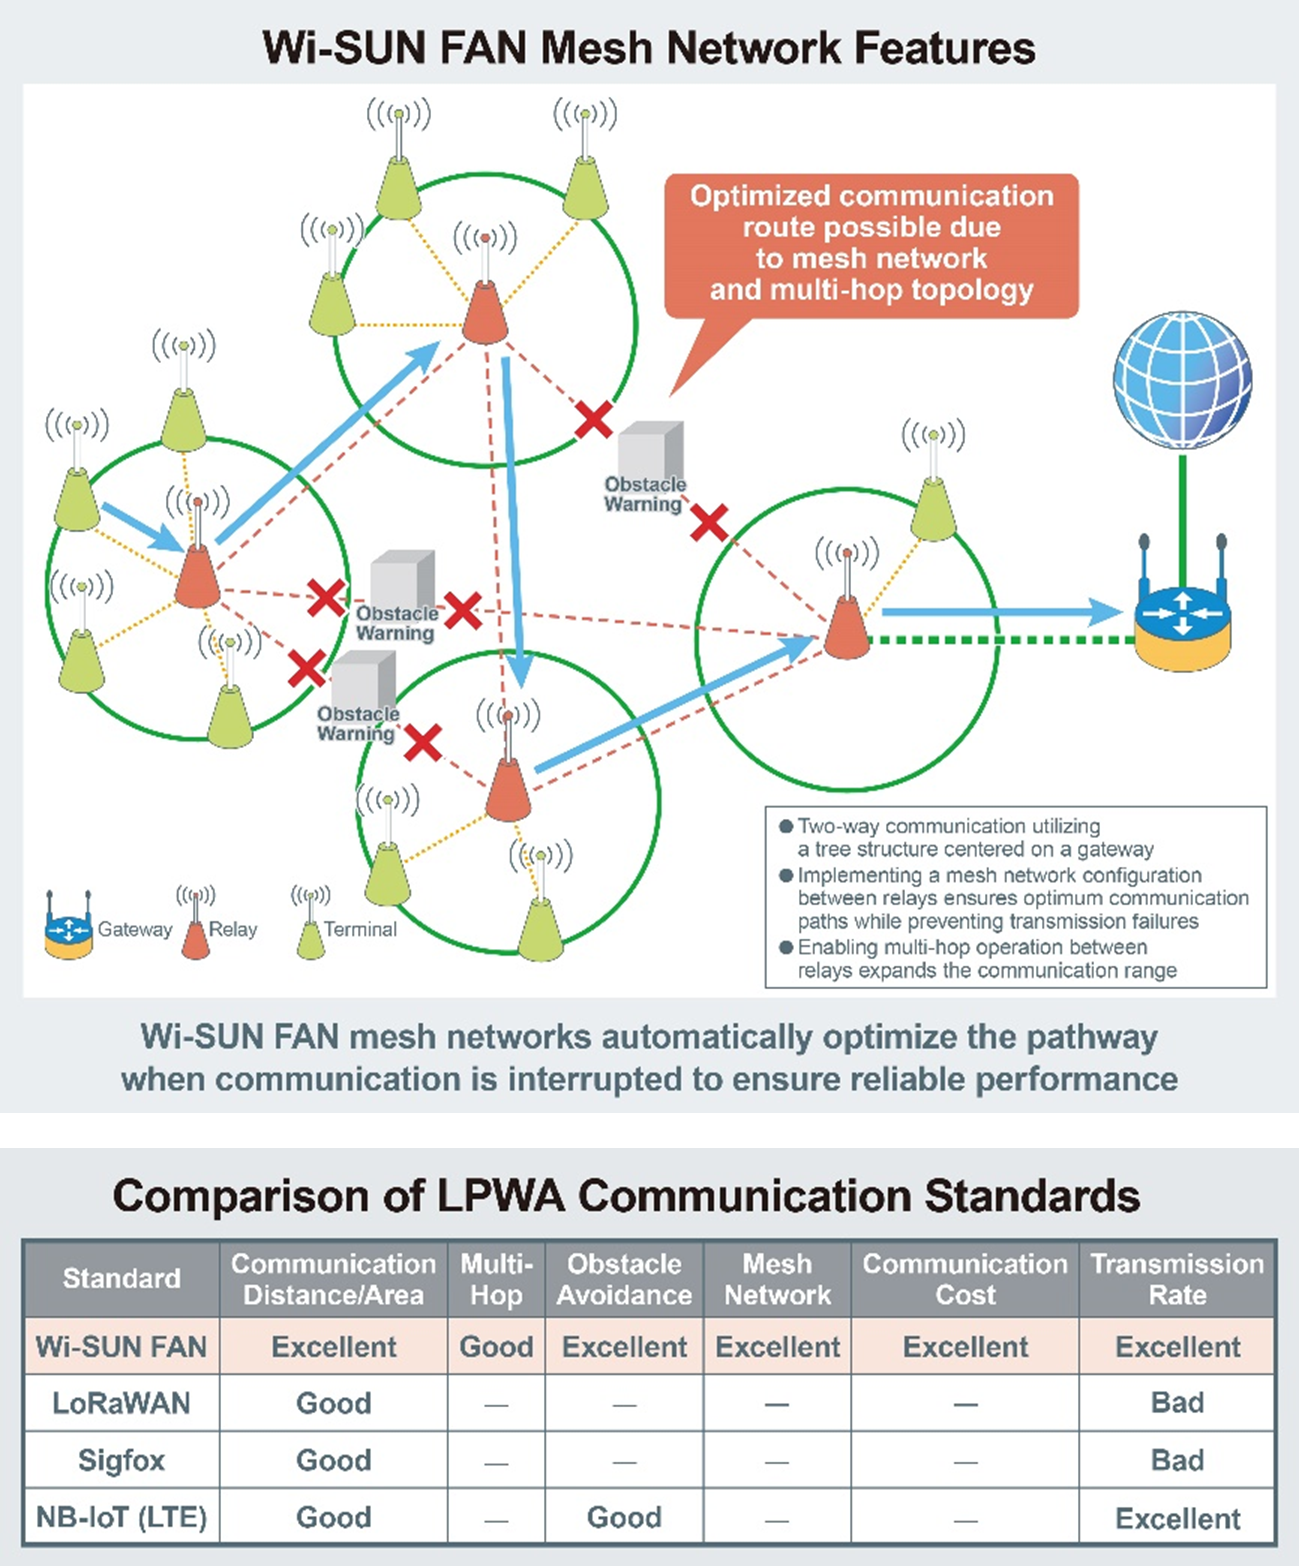 Wi-SUN FAN mesh network features and comparison of LPWA communication standards